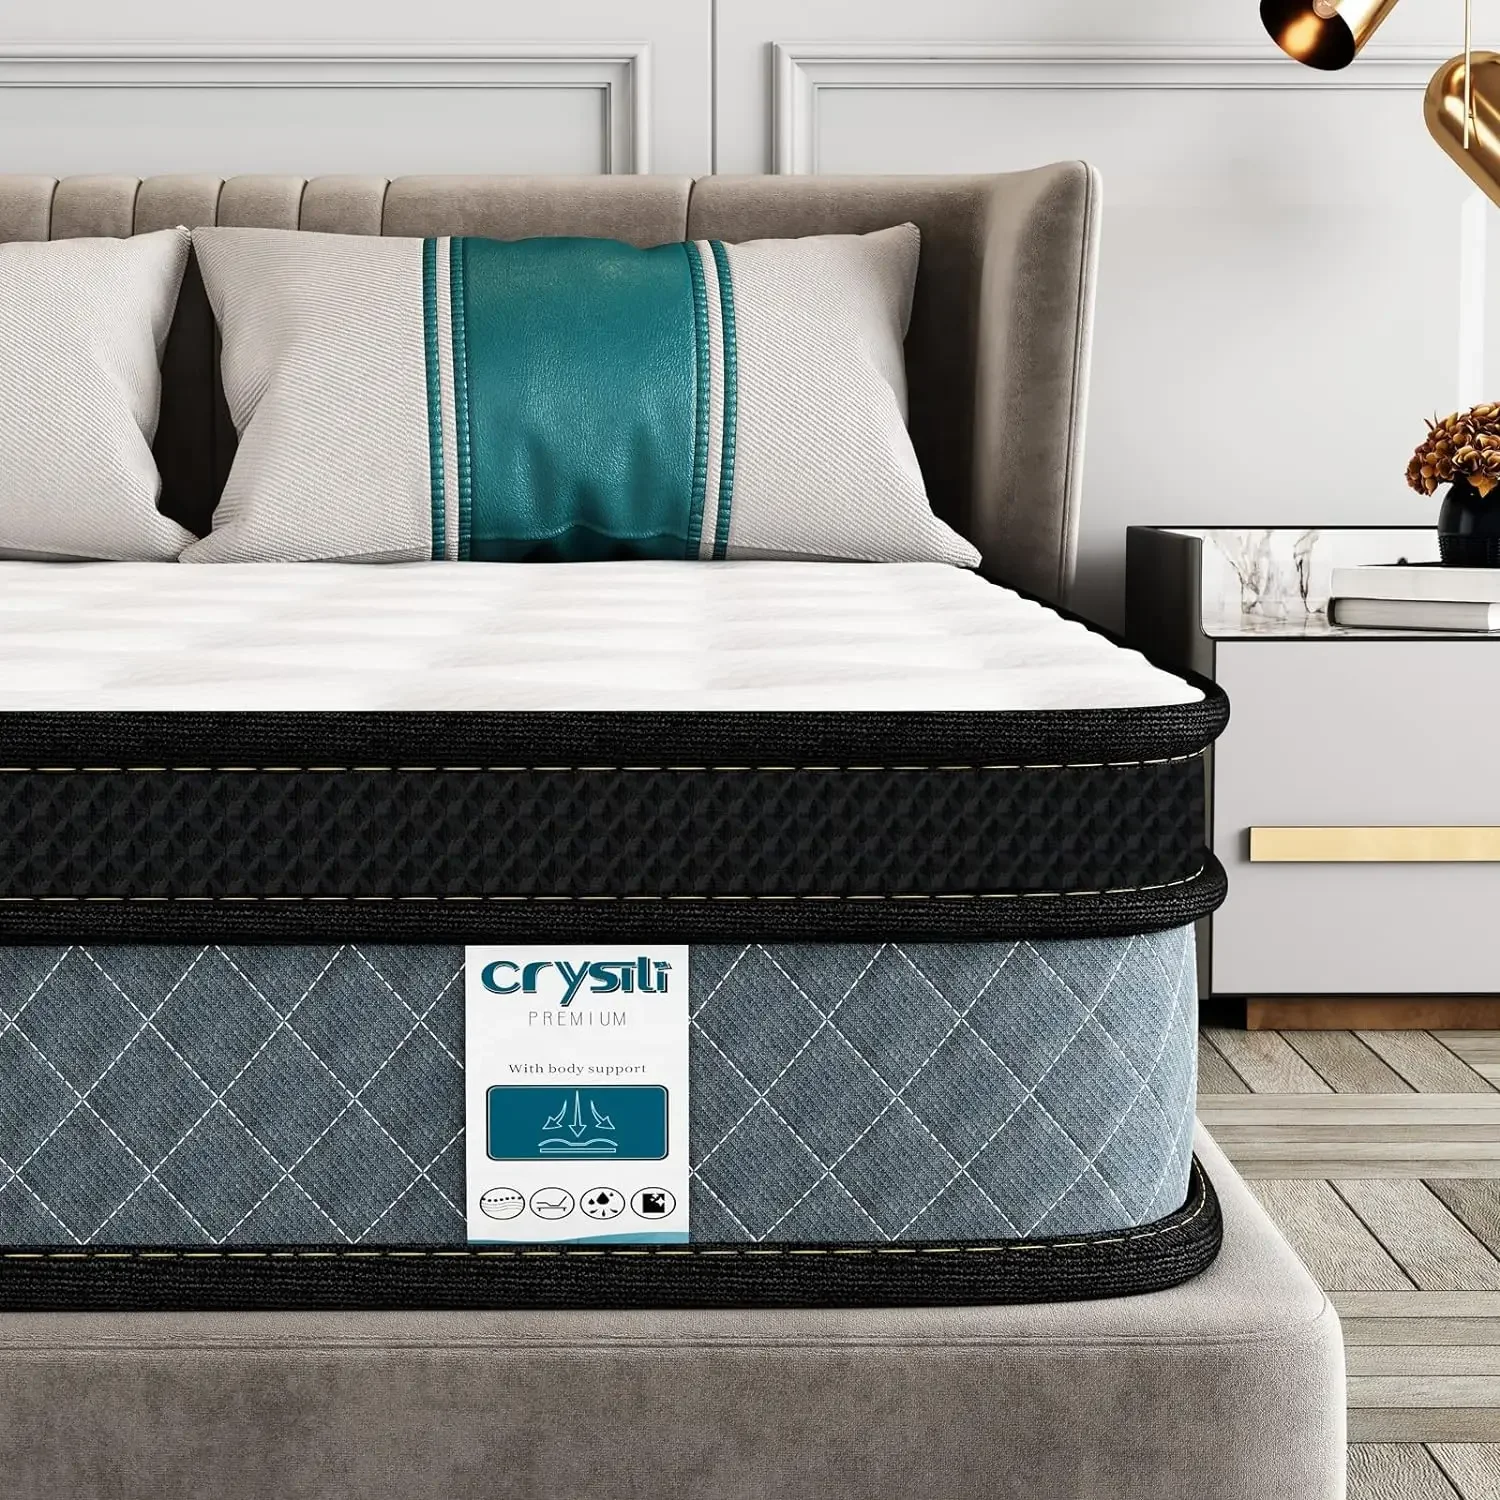 

Crystli Full Mattress,10 Inch Memory Foam Mattress with Innerspring Hybrid Full Size Mattress ina Box Pressure Relief&Supportive